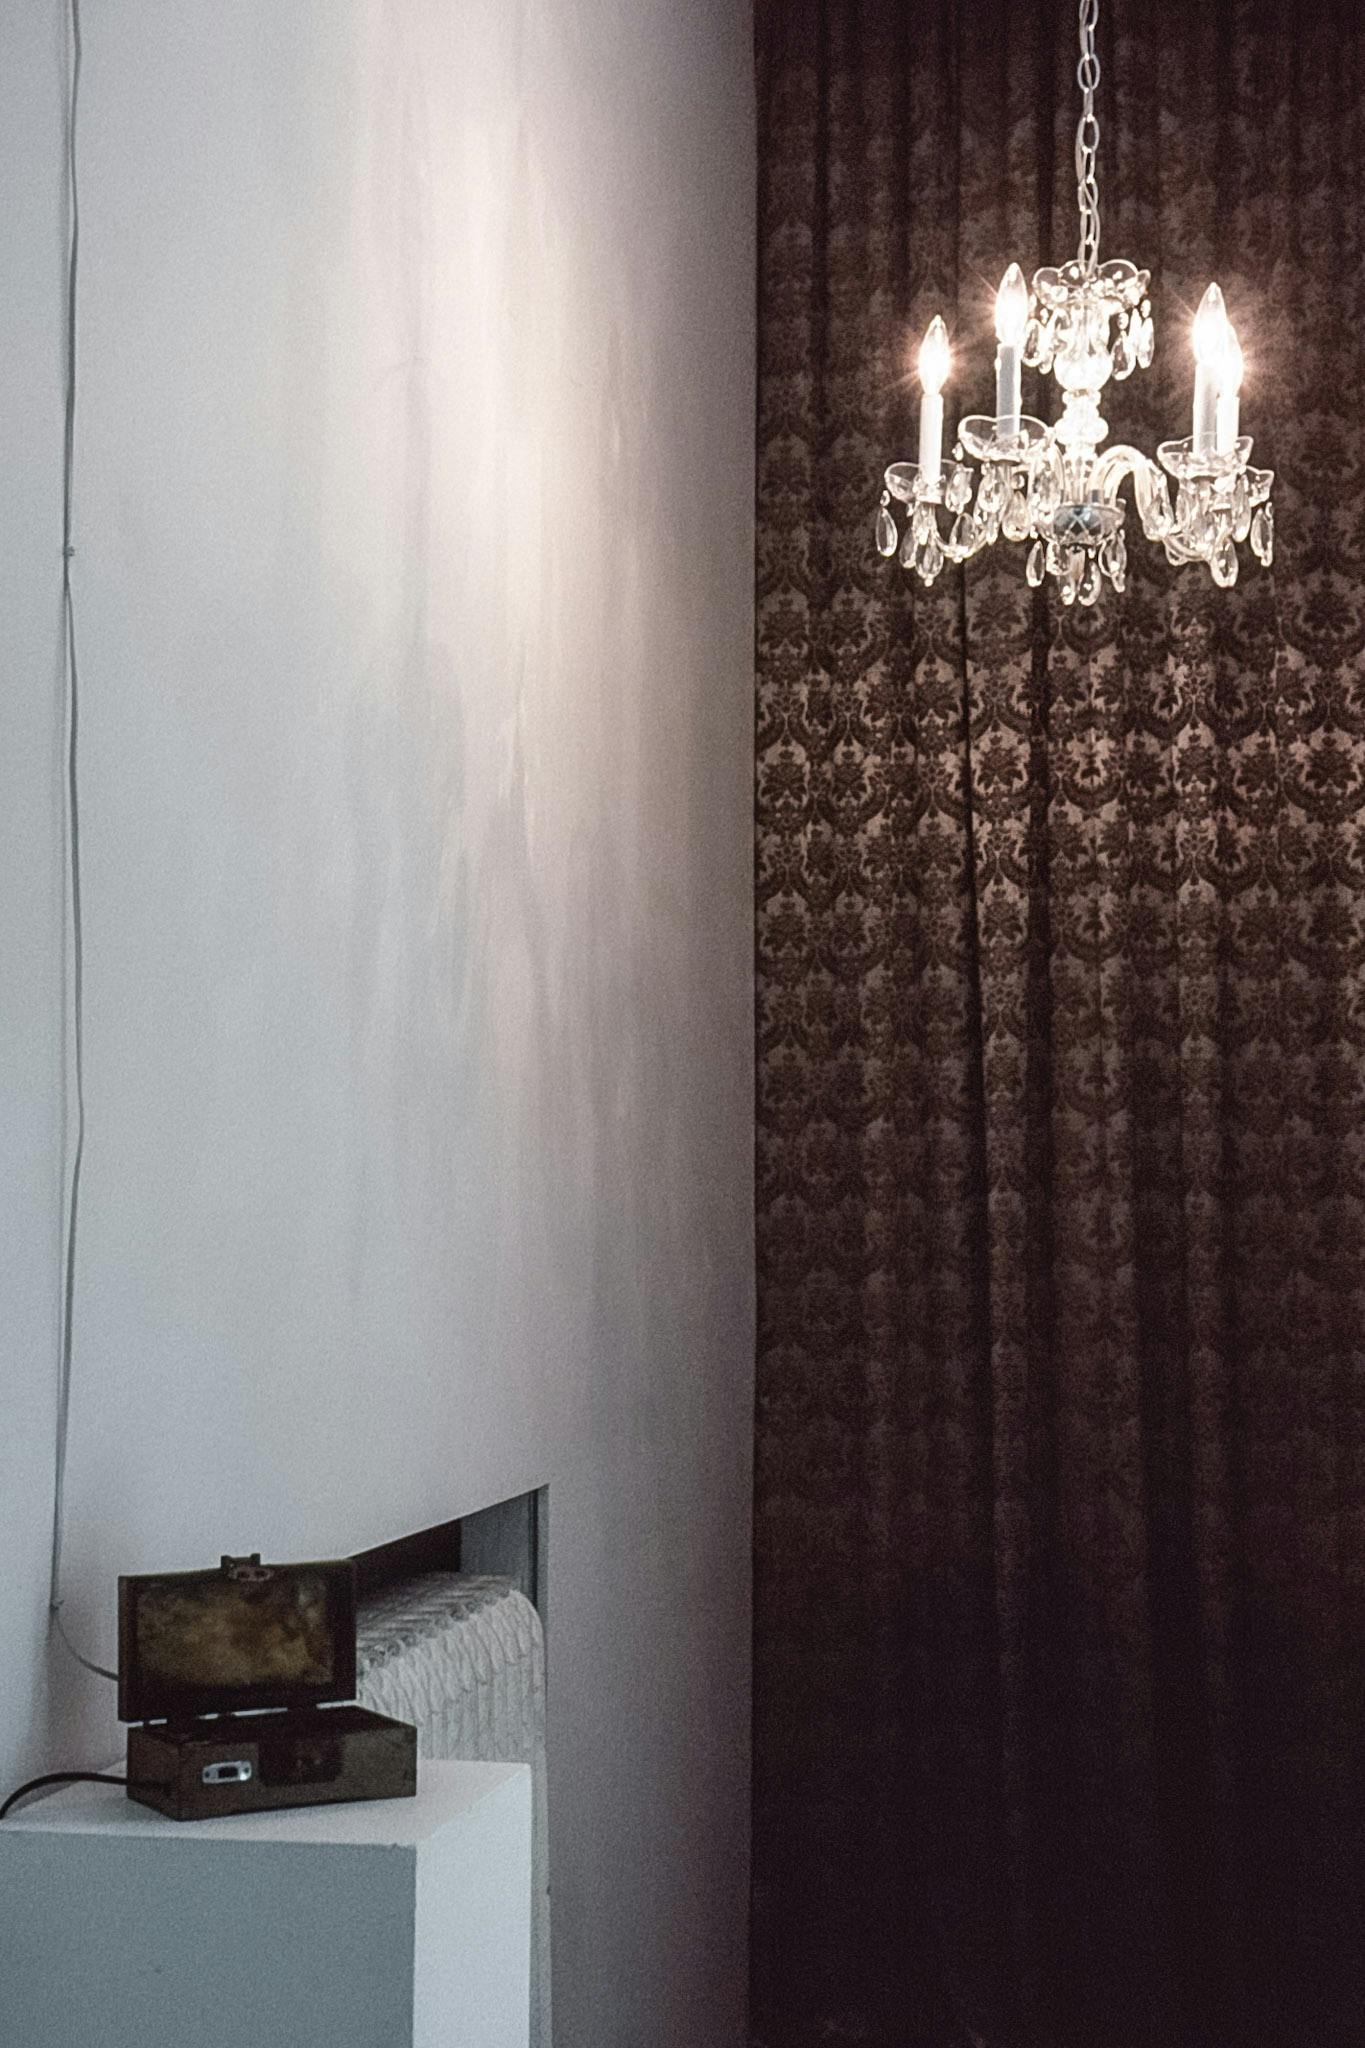 An installation image of a corner of a gallery space. A curtain is installed on a back wall. A small chandelier is hanging from the ceiling. A small box-like shaped object is installed on a pedestal. 